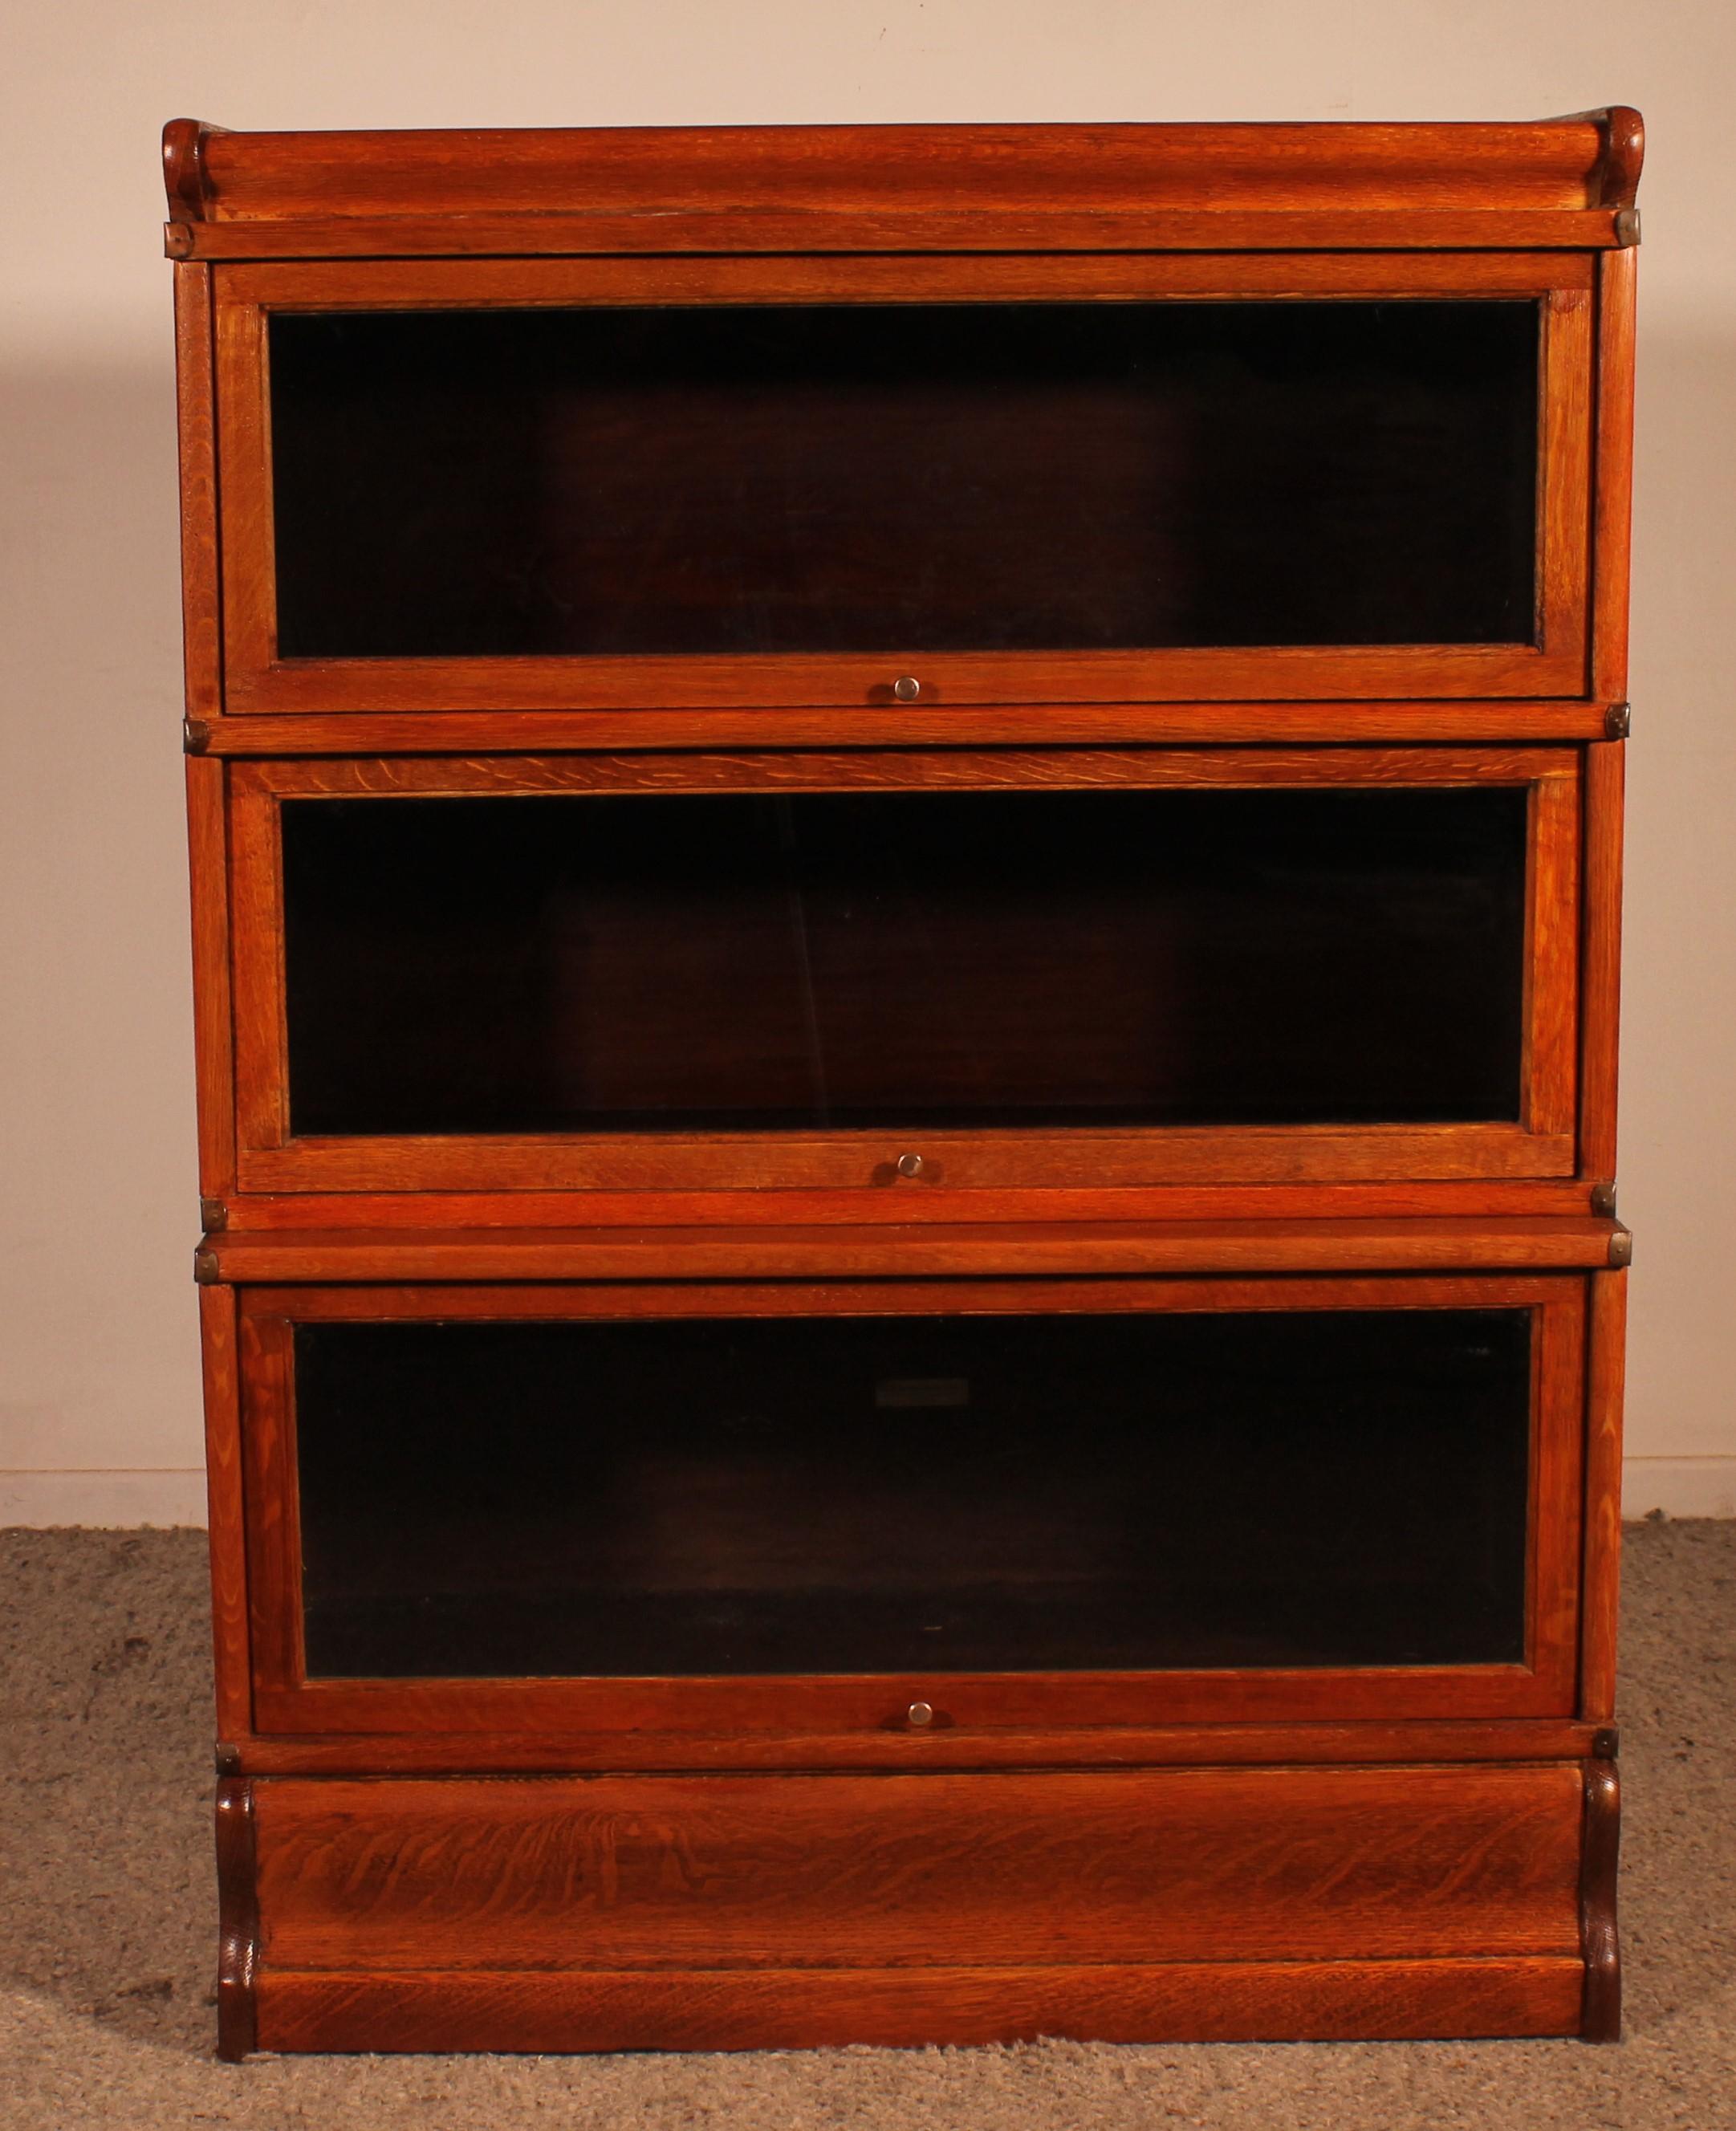 Elegant Globe Wernicke London bookcase in oak from the end of the 19th century - Early 20th century  from England which has 3 elements
It has a lower advanced part which is unusual and practical
Small model which is composed of a molded base and top